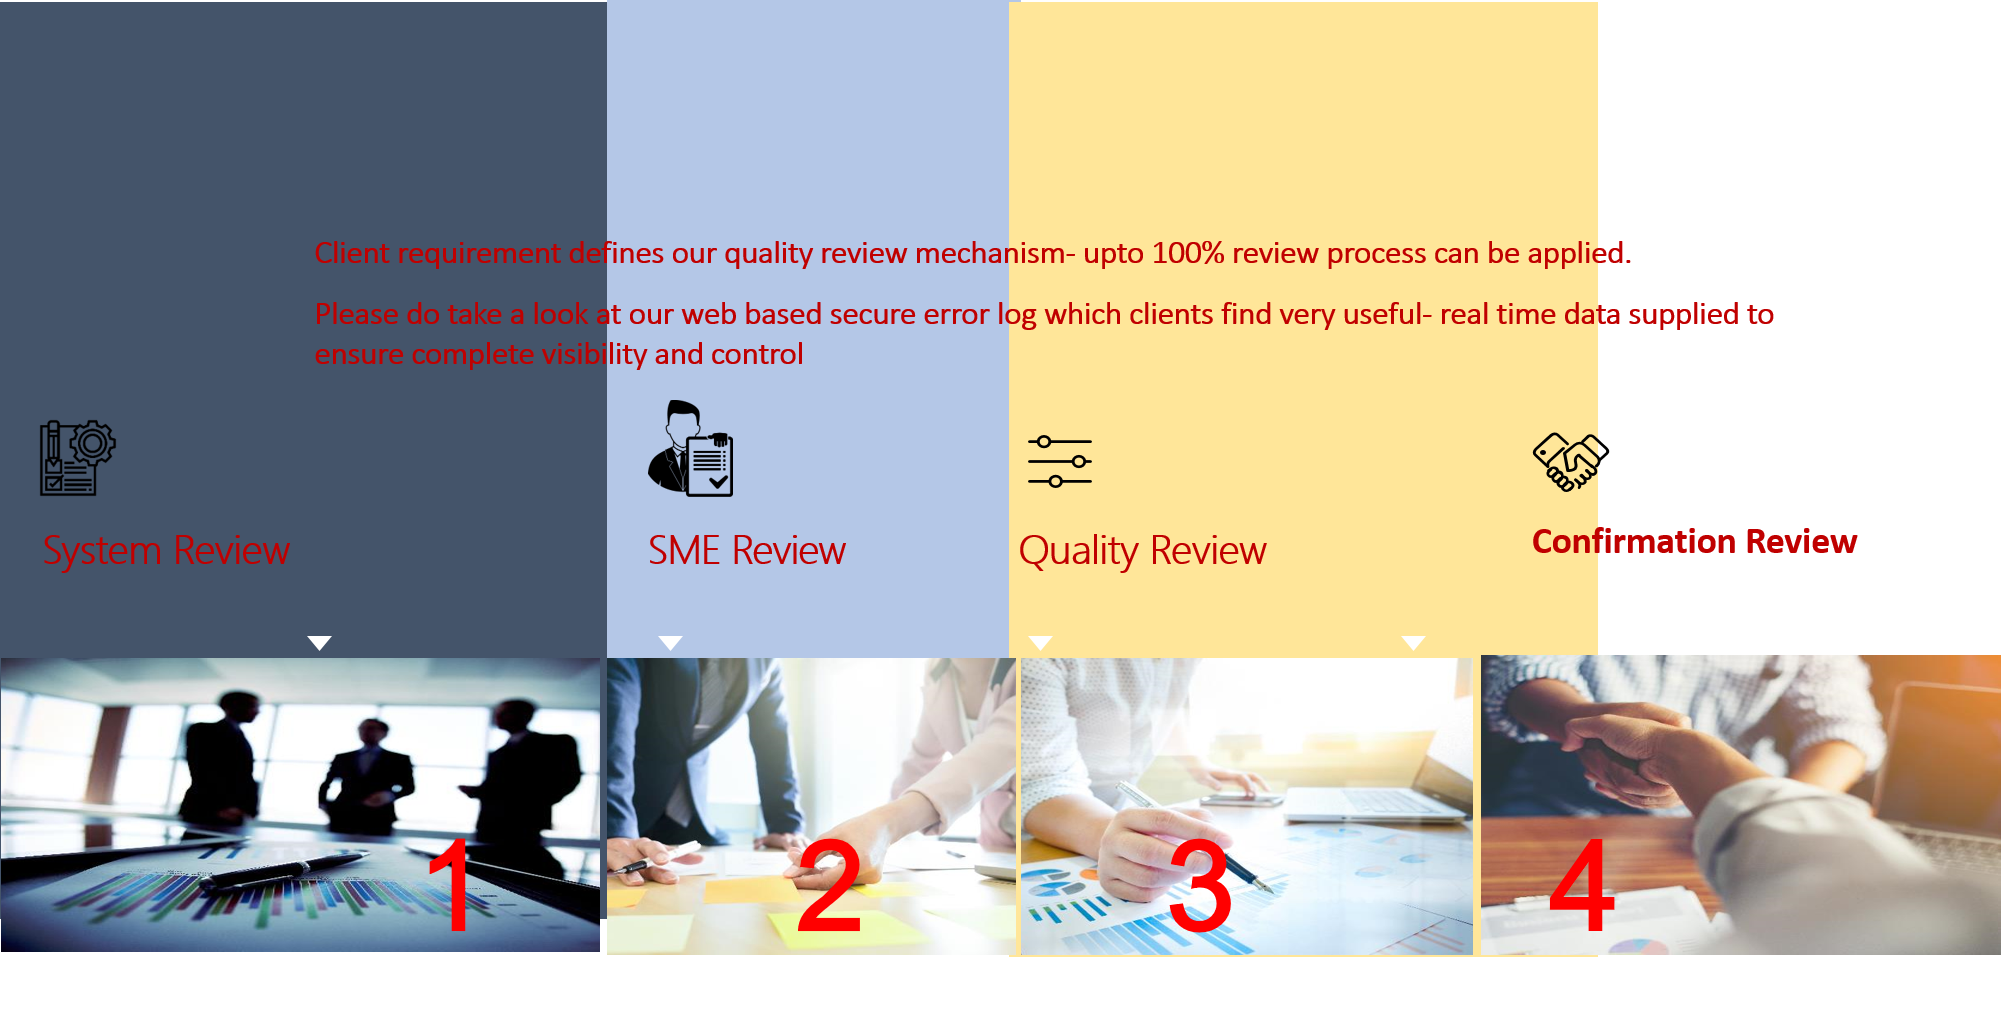 Quality review mechanism